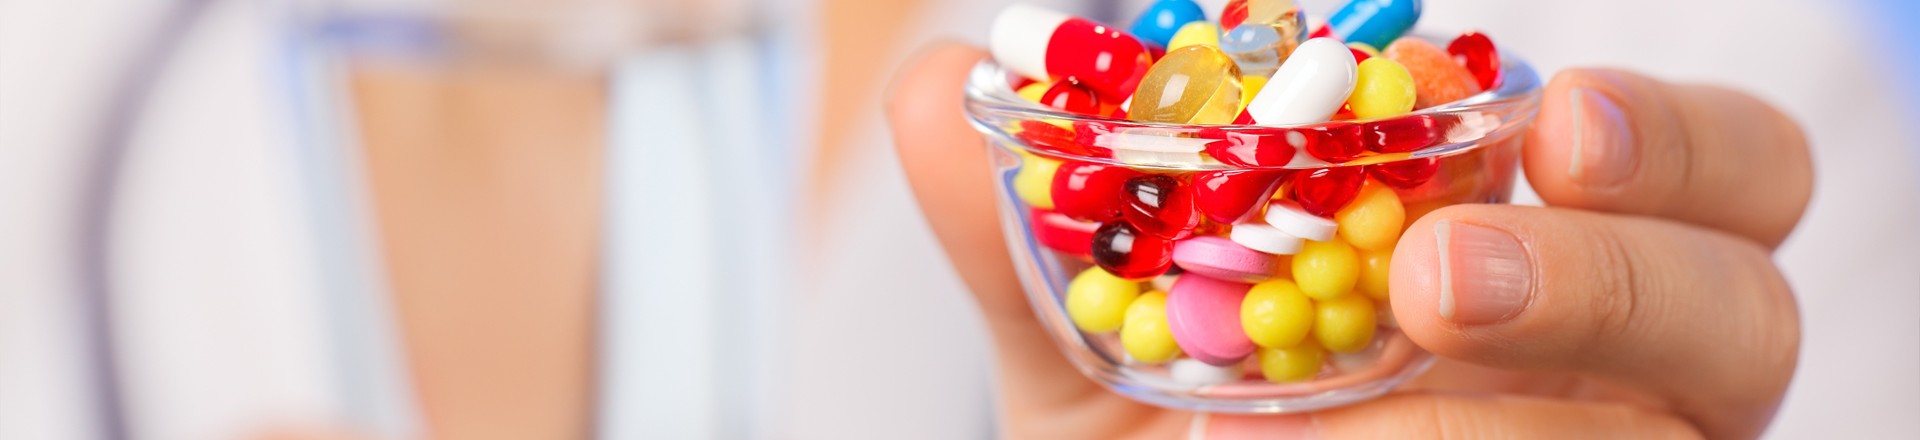 polypharmacy and the polypill - too many medications symbolized by a bowlful of pills